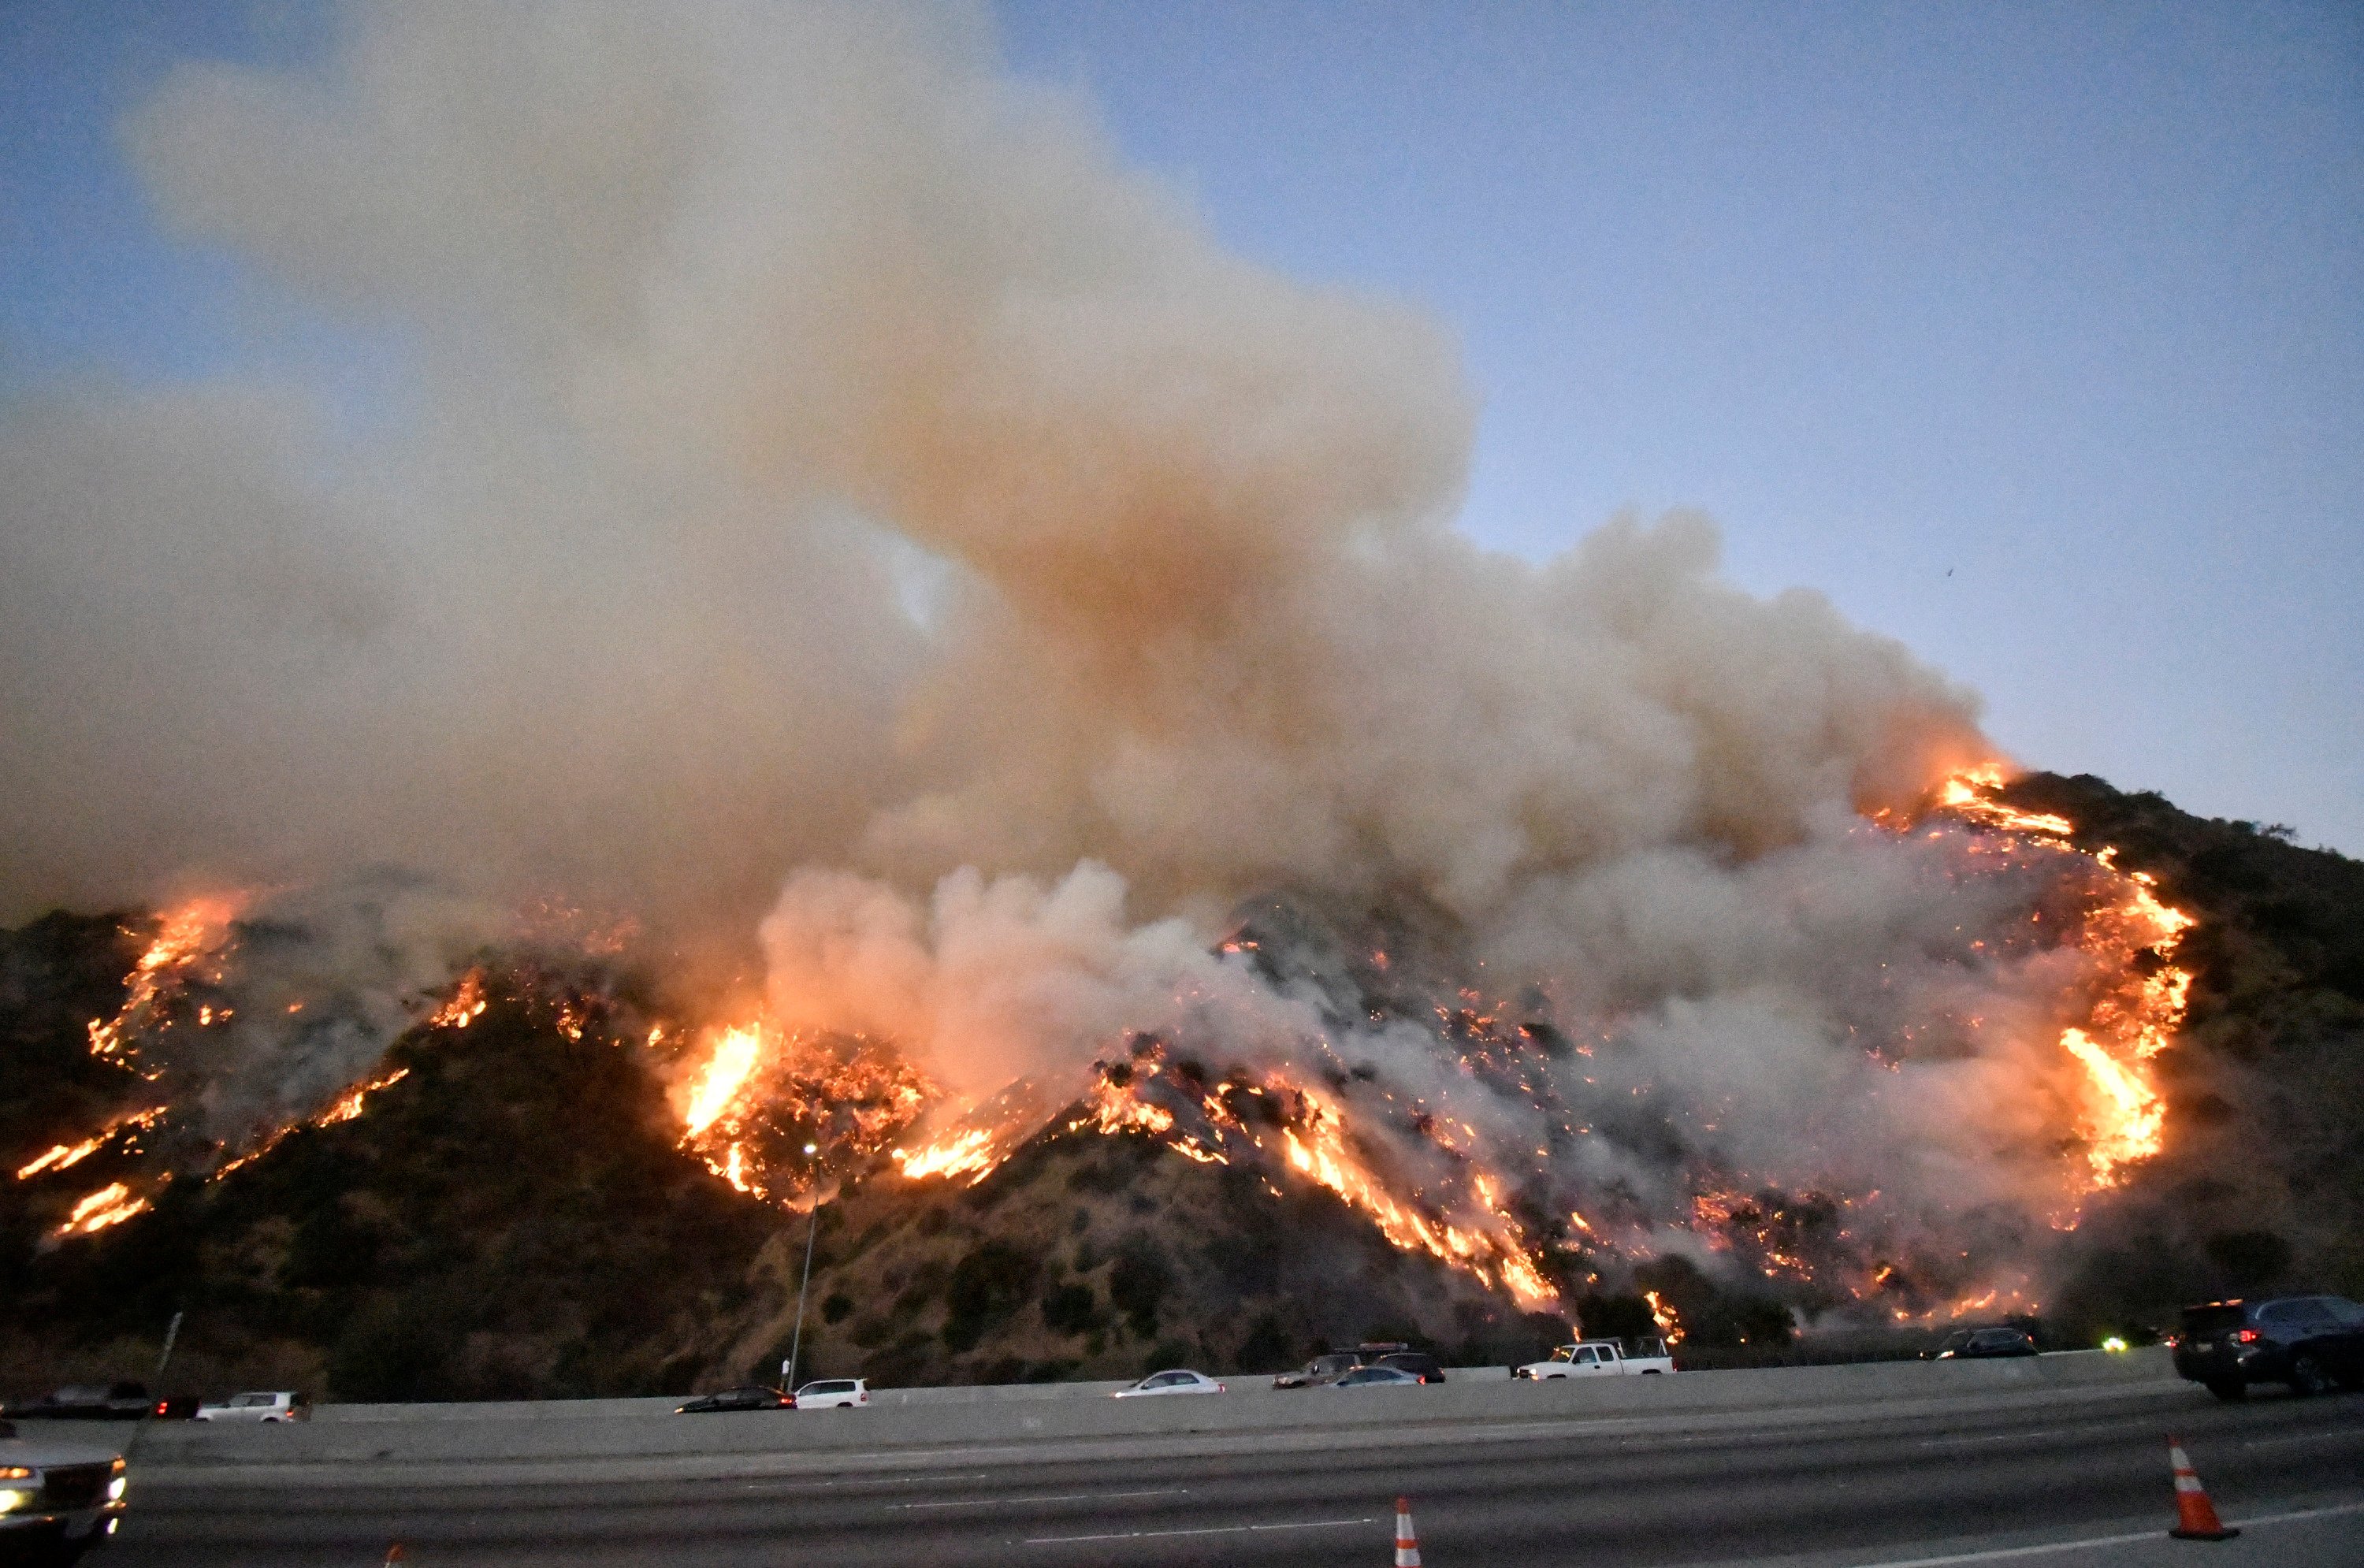 The Getty Fire burns near the Getty Center along the 405 freeway north of Los Angeles, California, U.S. October 28, 2019. REUTERS/ Gene Blevins